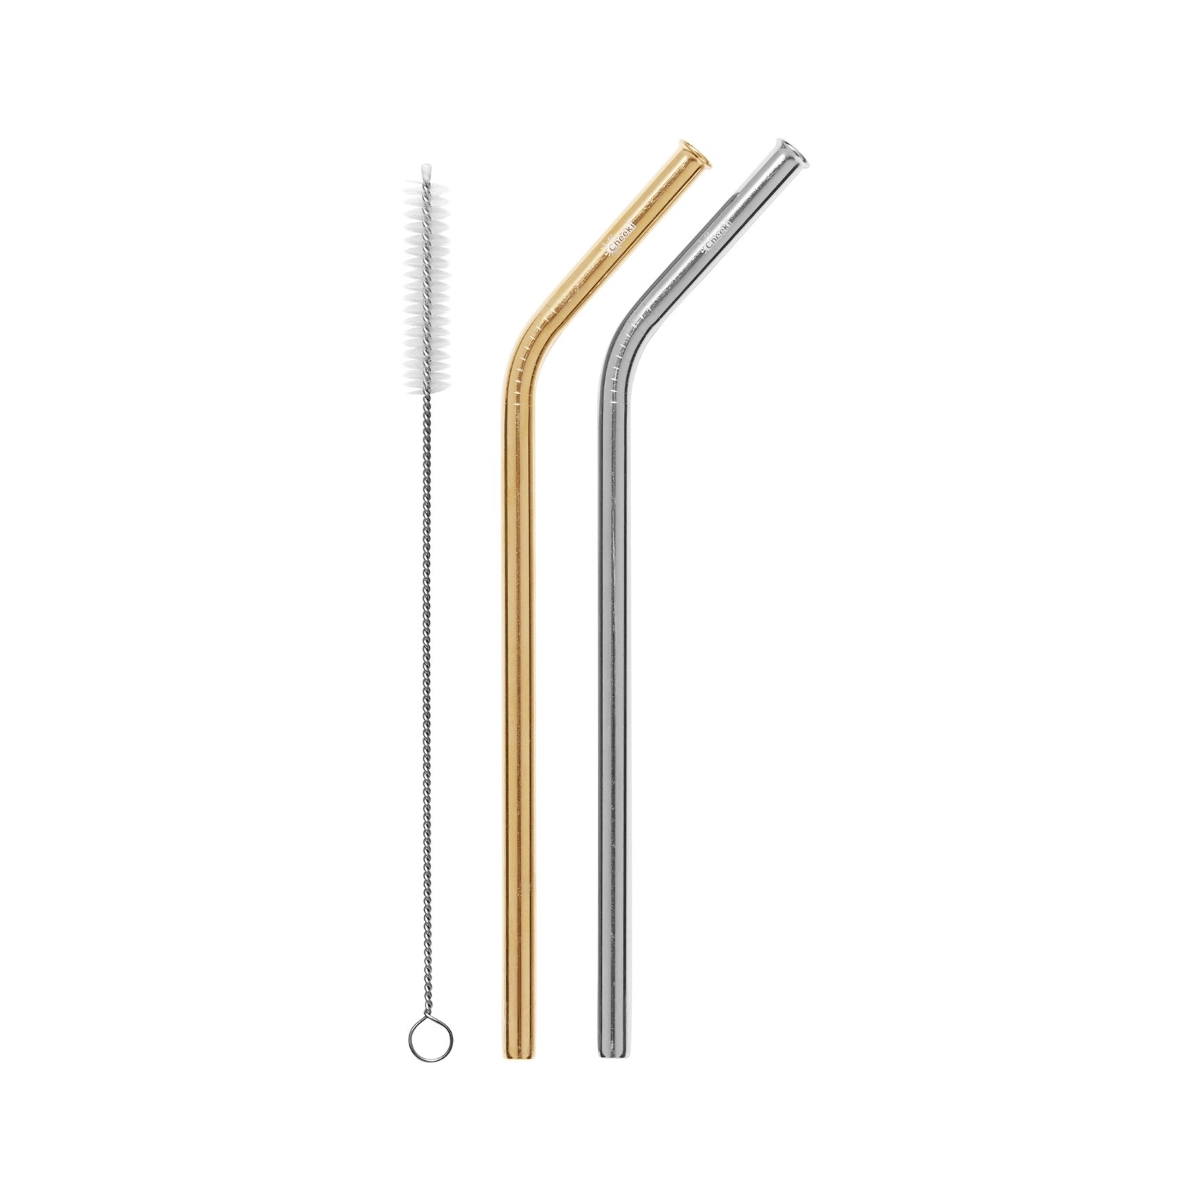 Cheeki 2 Pack Bent Stainless Steel Straws - Silver, Gold & Cleaning Brush